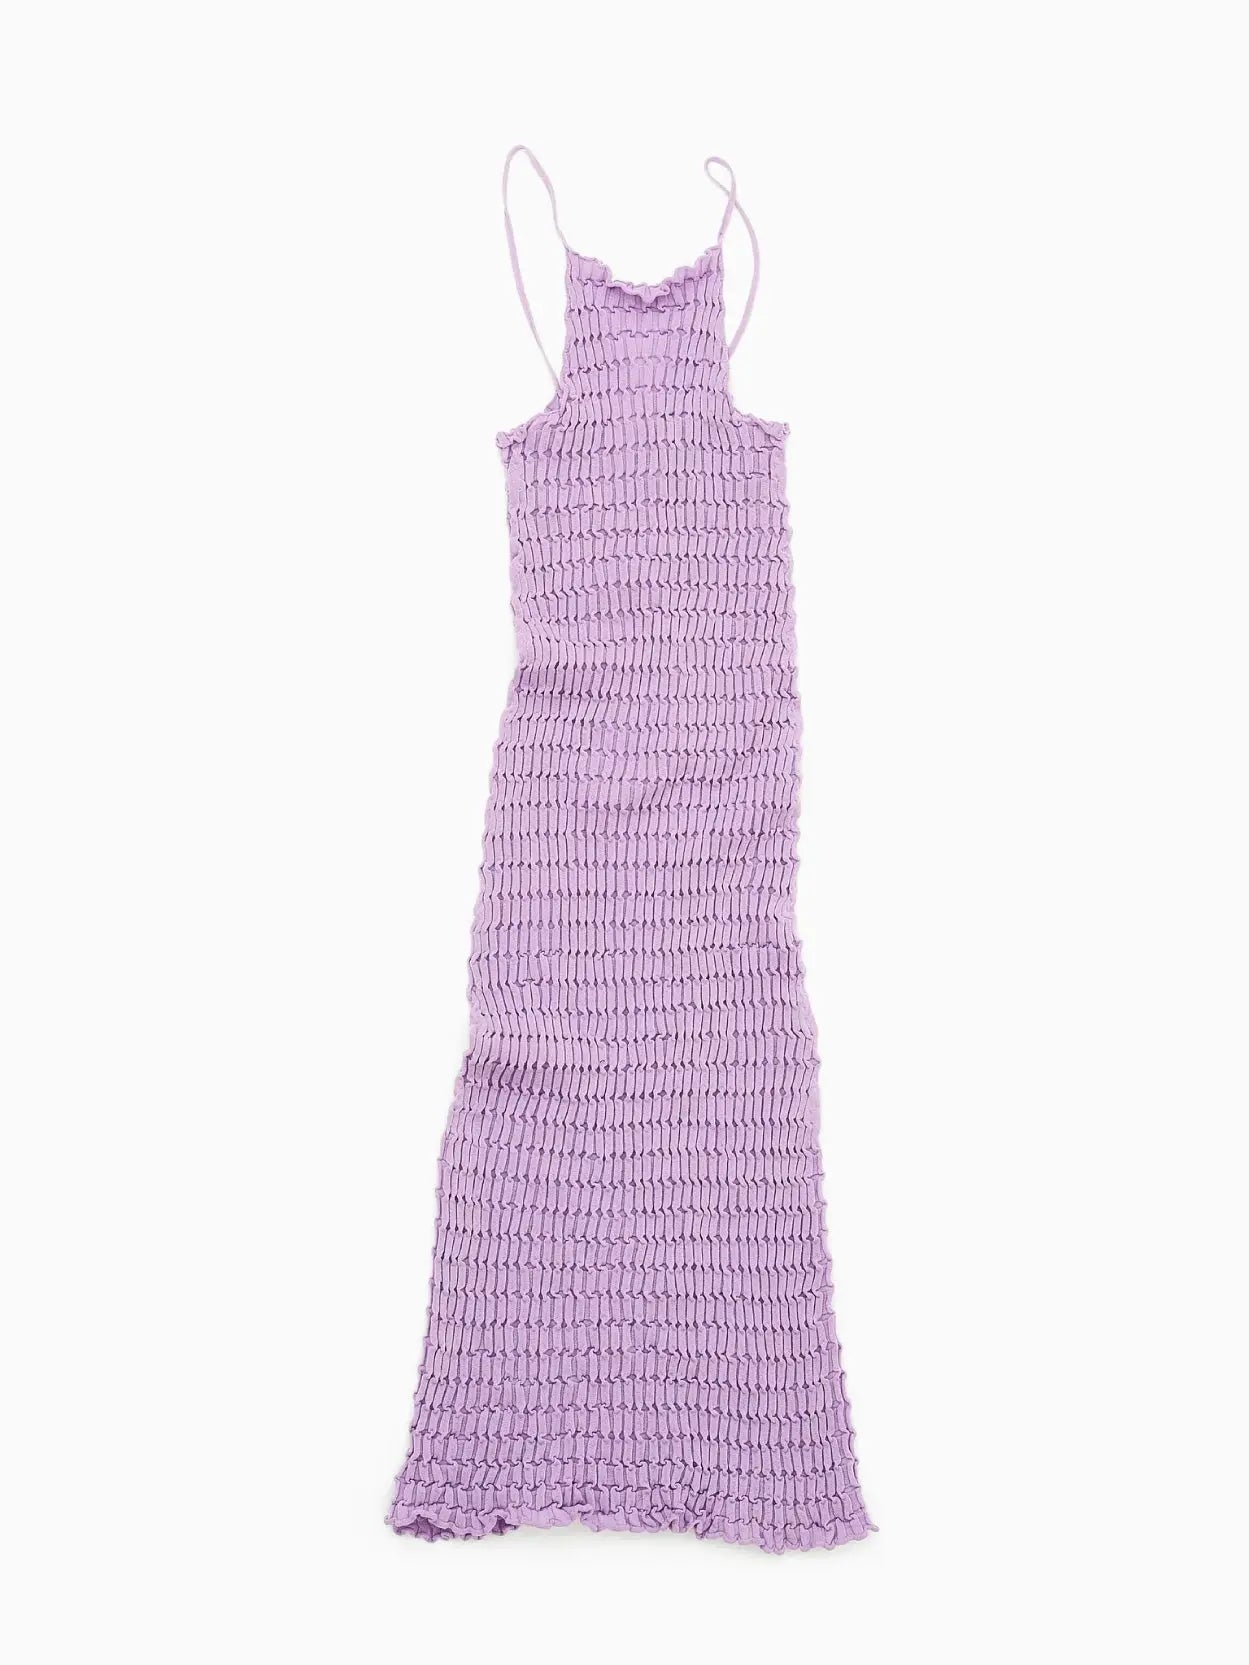 A Rina Dress Pink from Rus featuring a unique textured pattern with intricate, scalloped detailing. The dress has thin spaghetti straps and a long, flowing hem, giving it a stylish and elegant appearance perfect for exploring the streets of Barcelona.